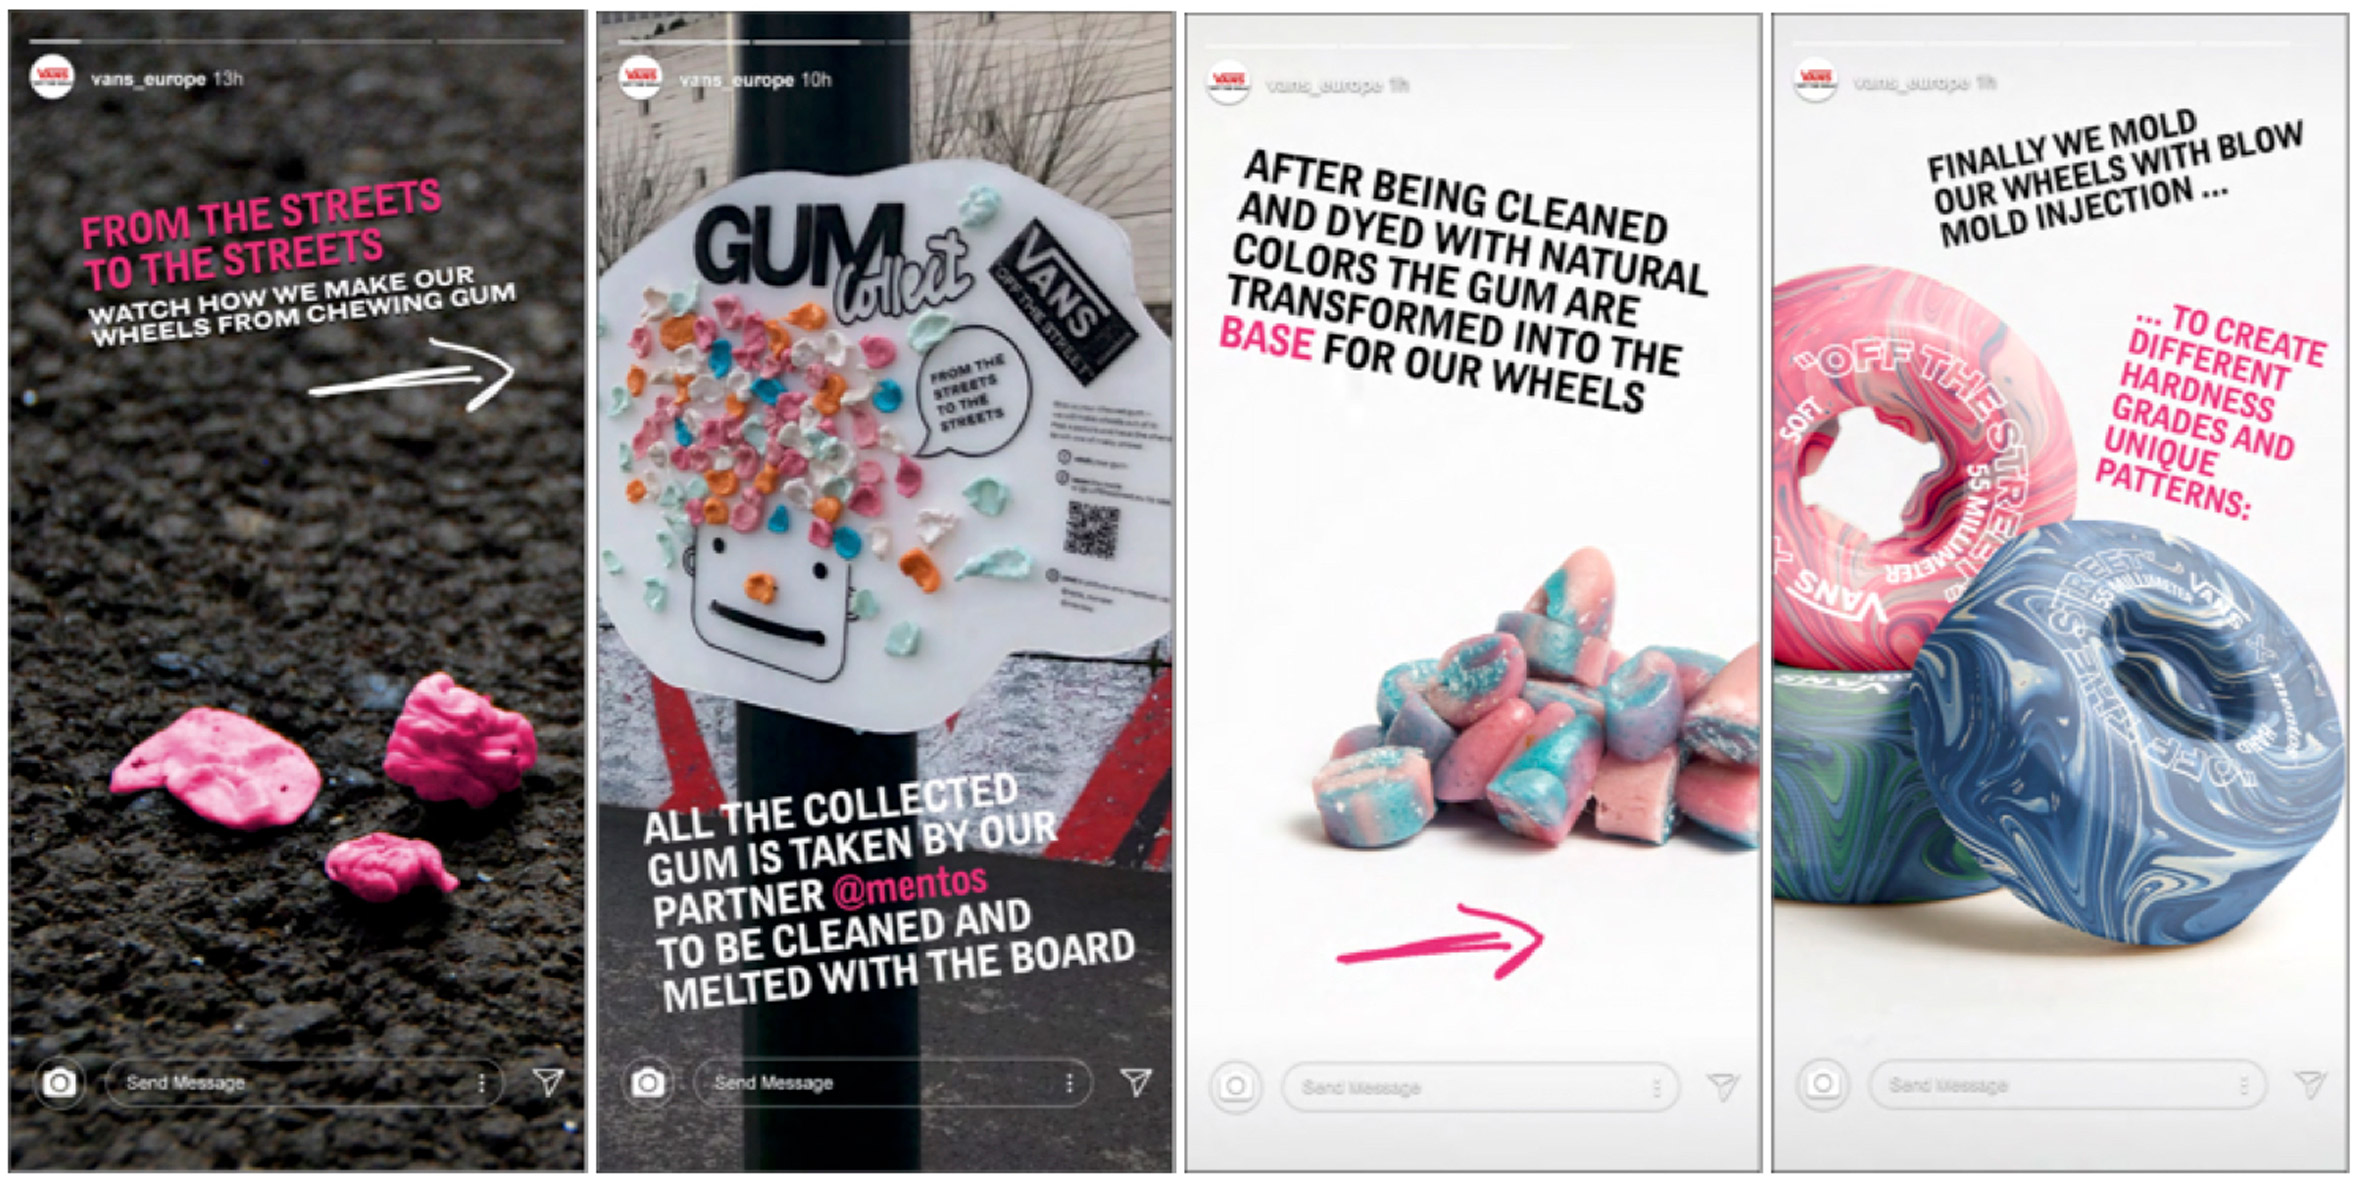 Illustration of process behind collection and recycling chewing gum into skateboard wheels